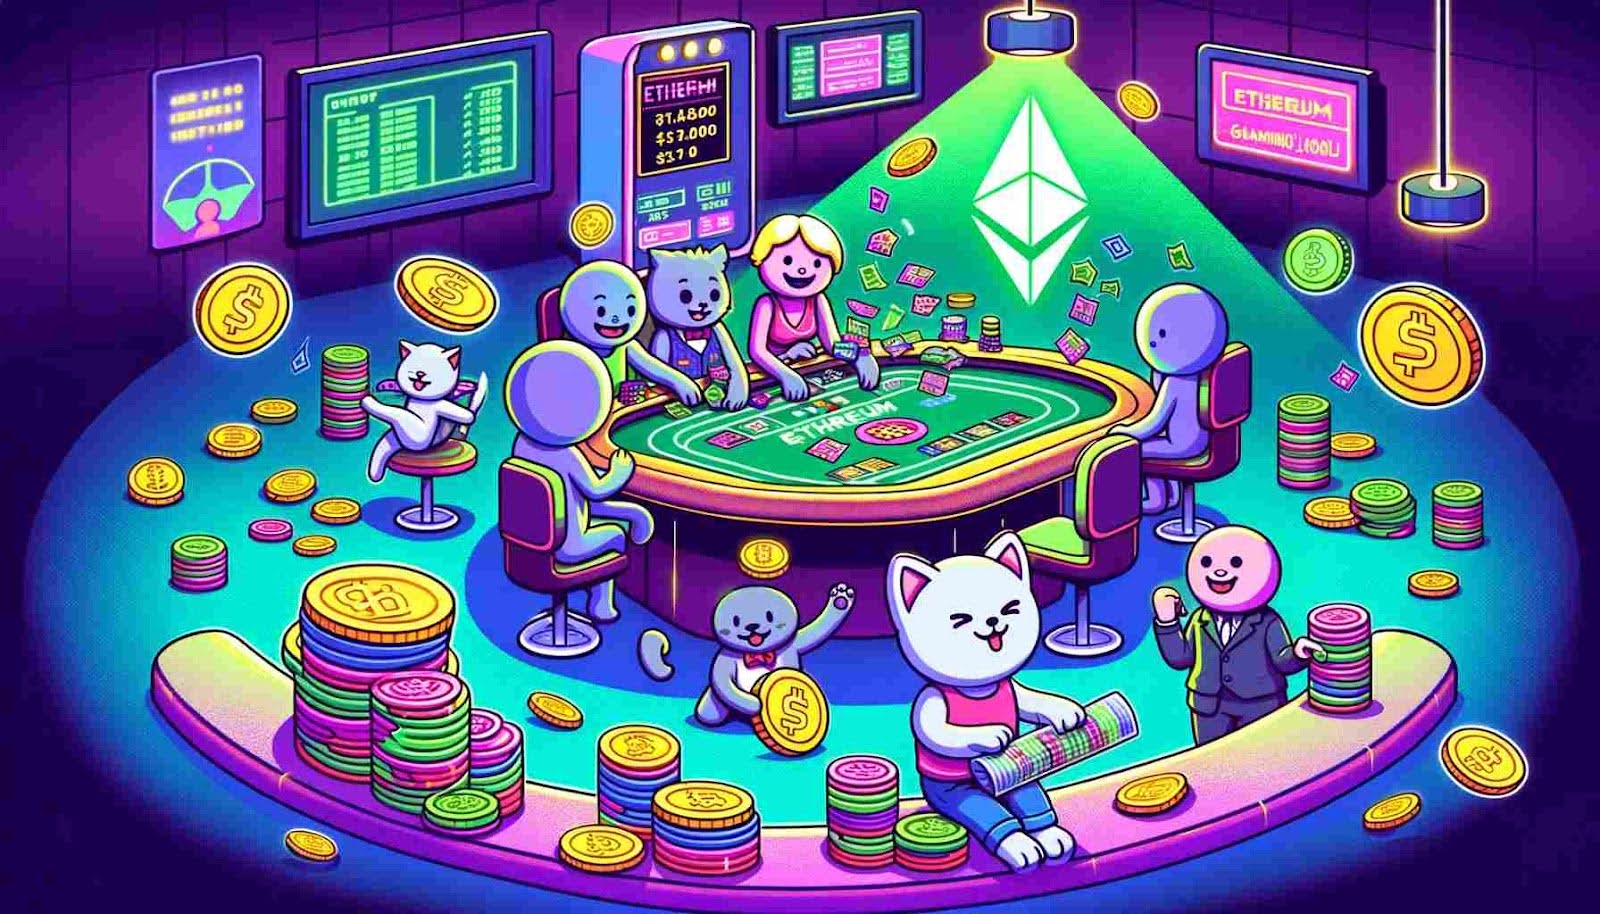 The World Of Ethereum Betting